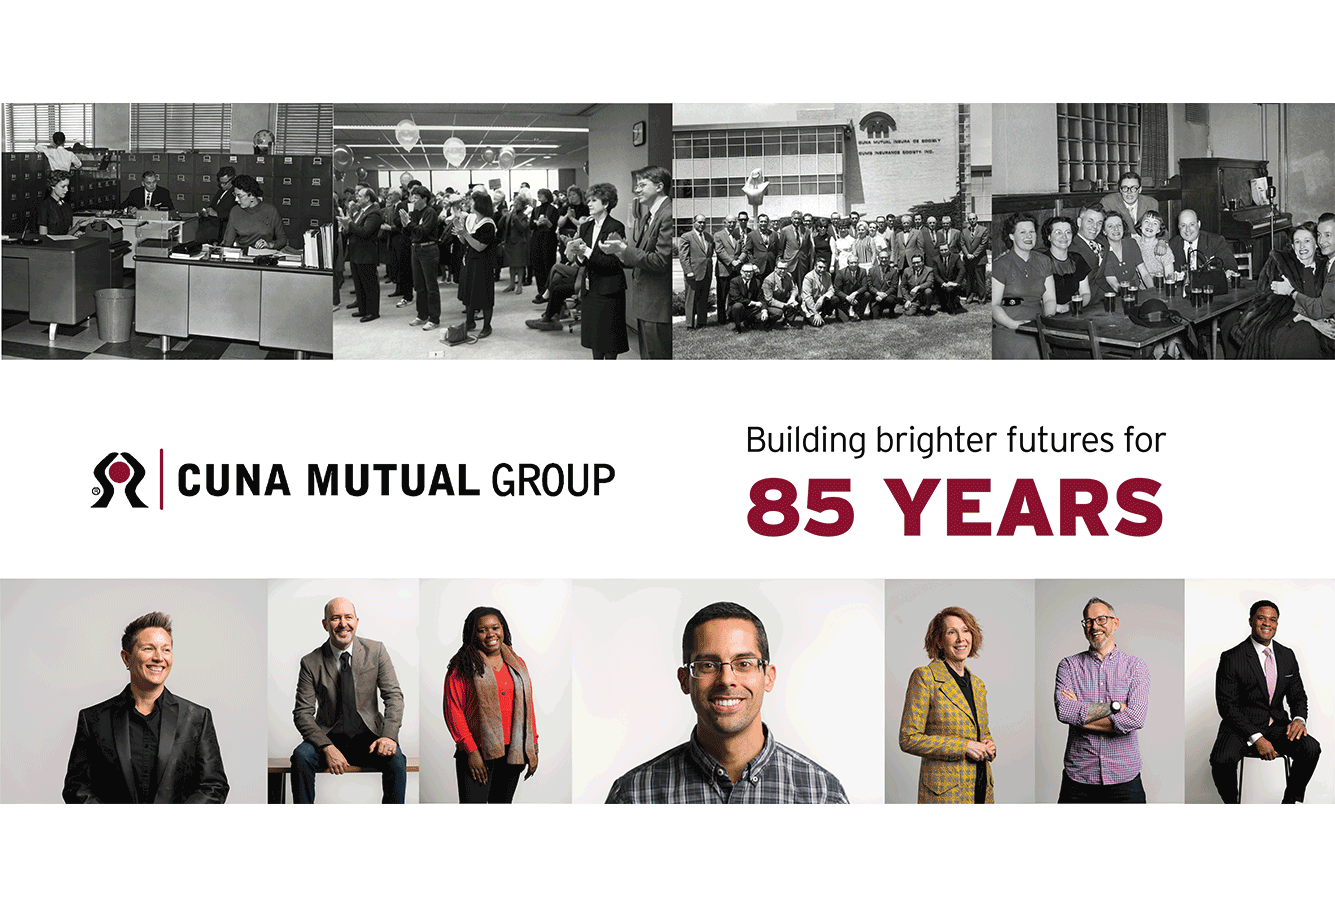 Building brighter futures for 85 years